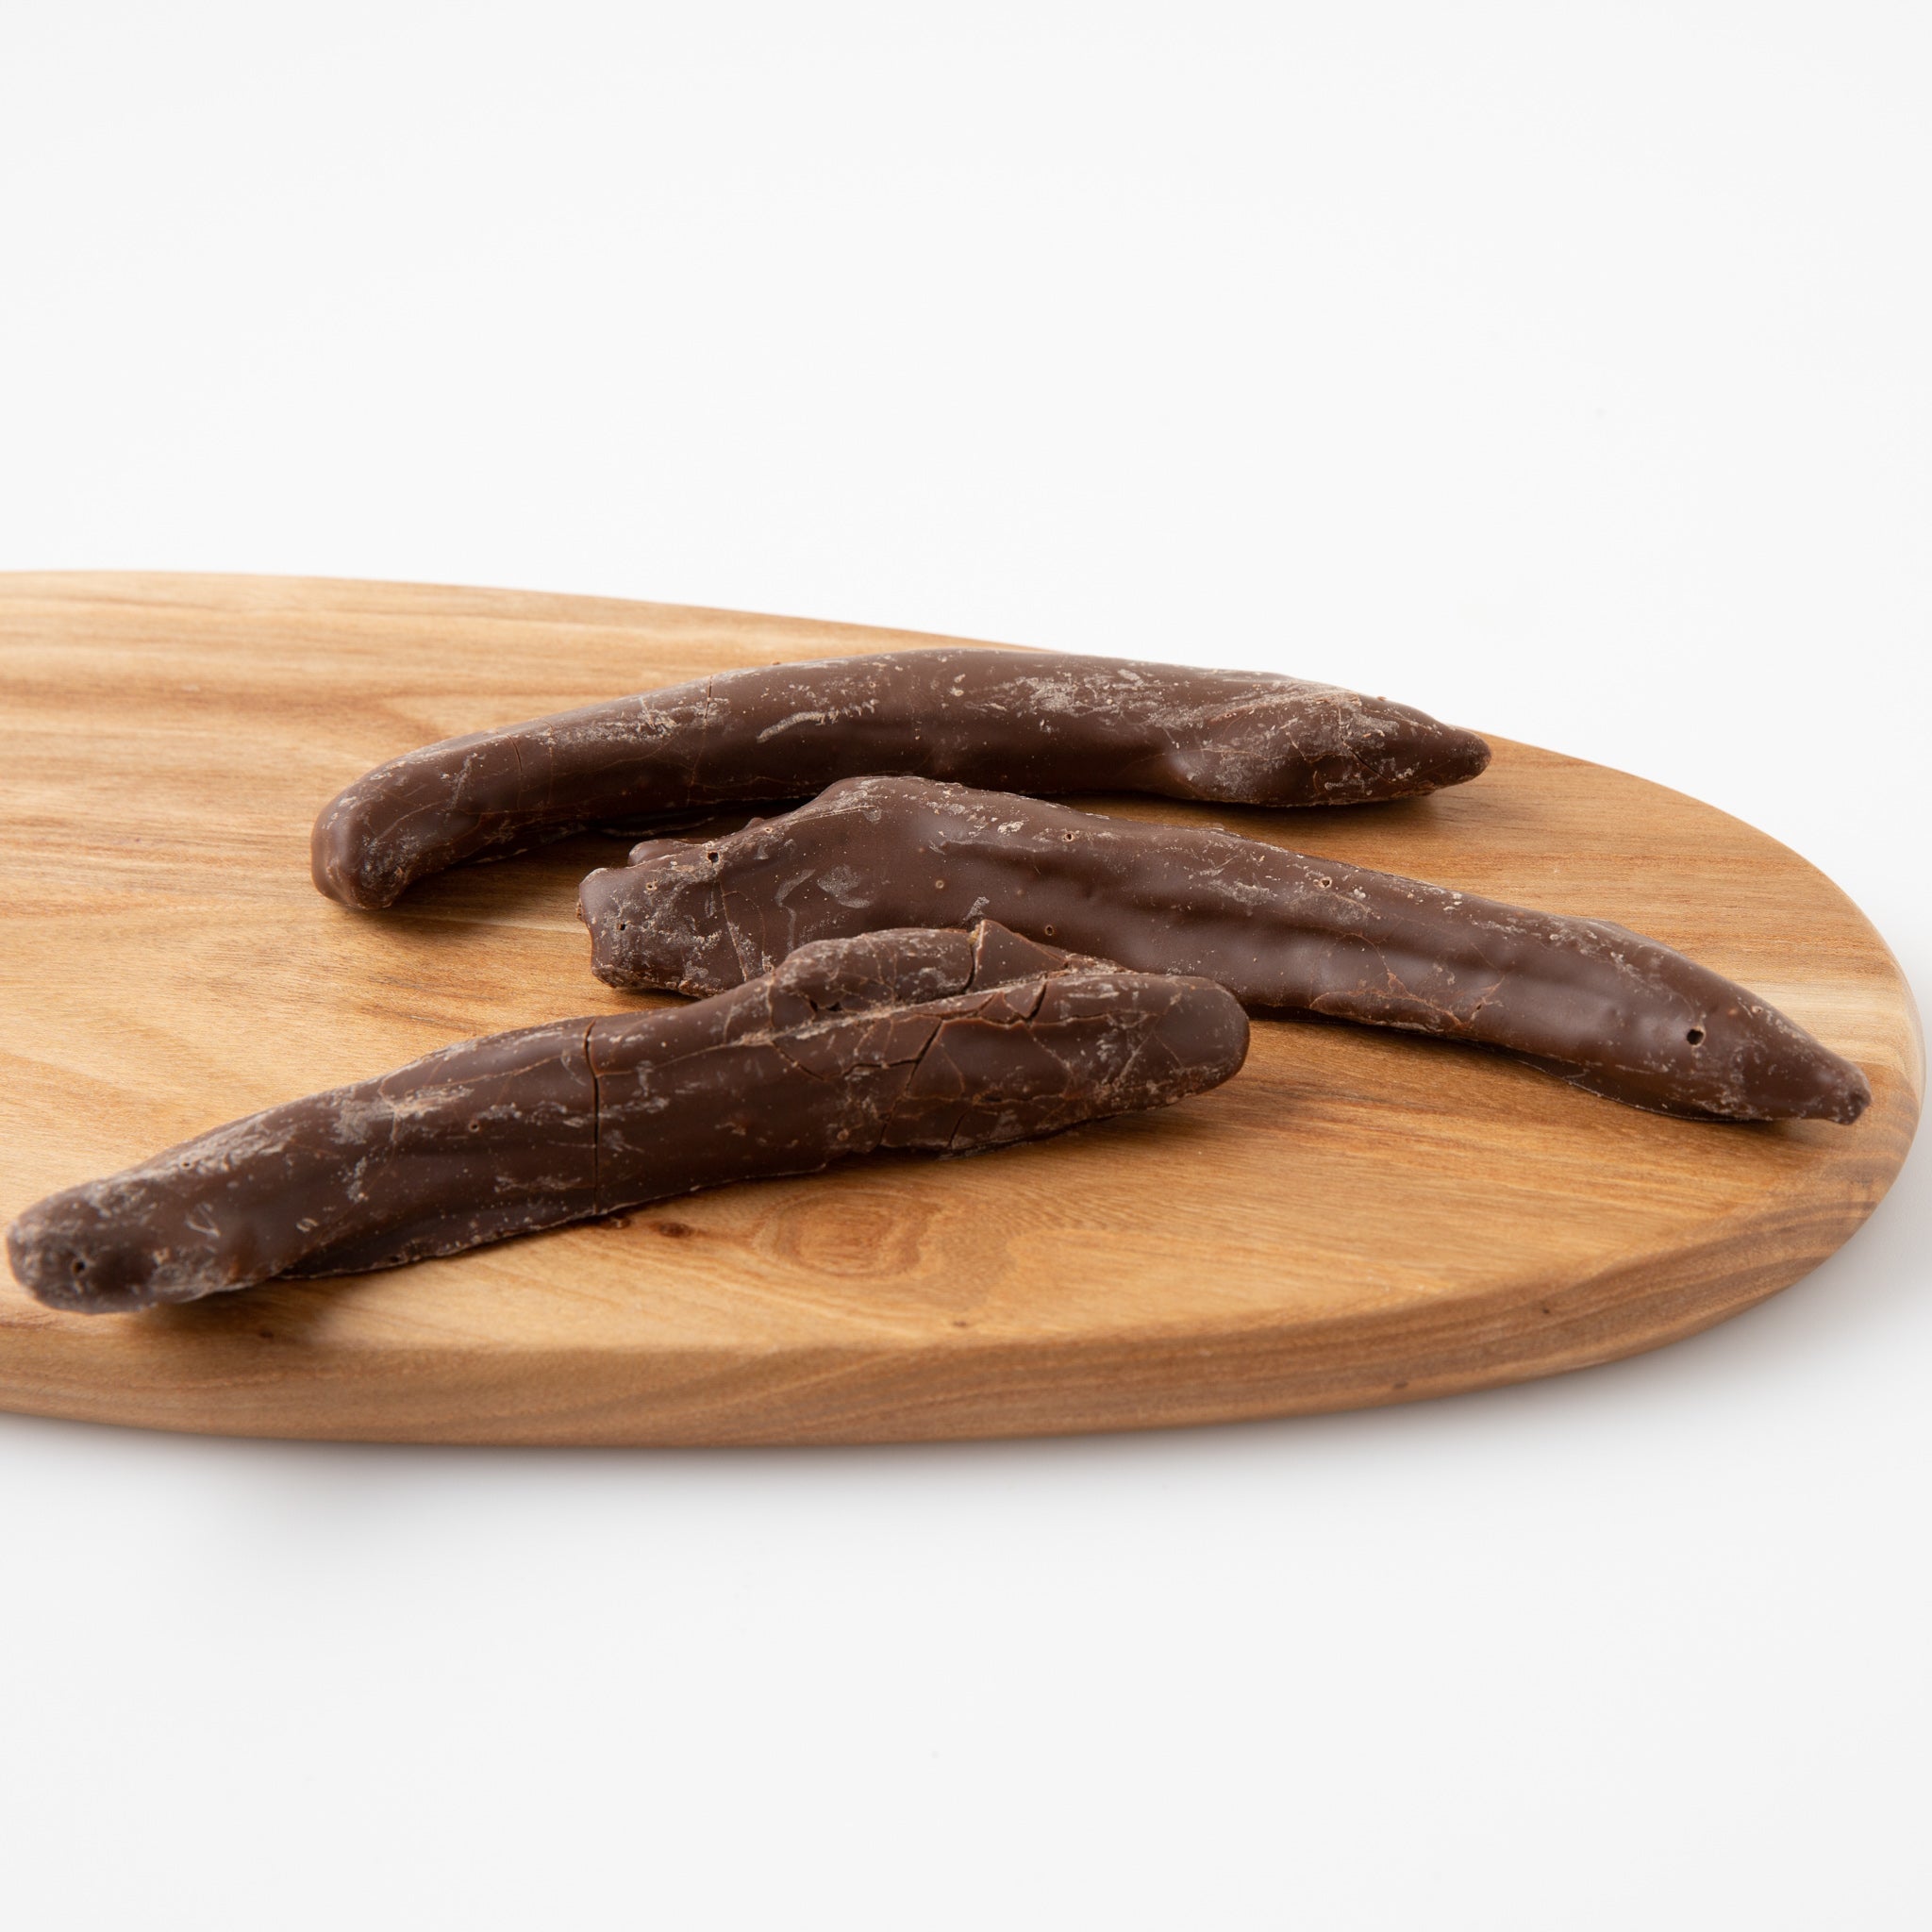 A close up photo Carob Coated Bananas (Carob) on wooden serving board - Naked Foods